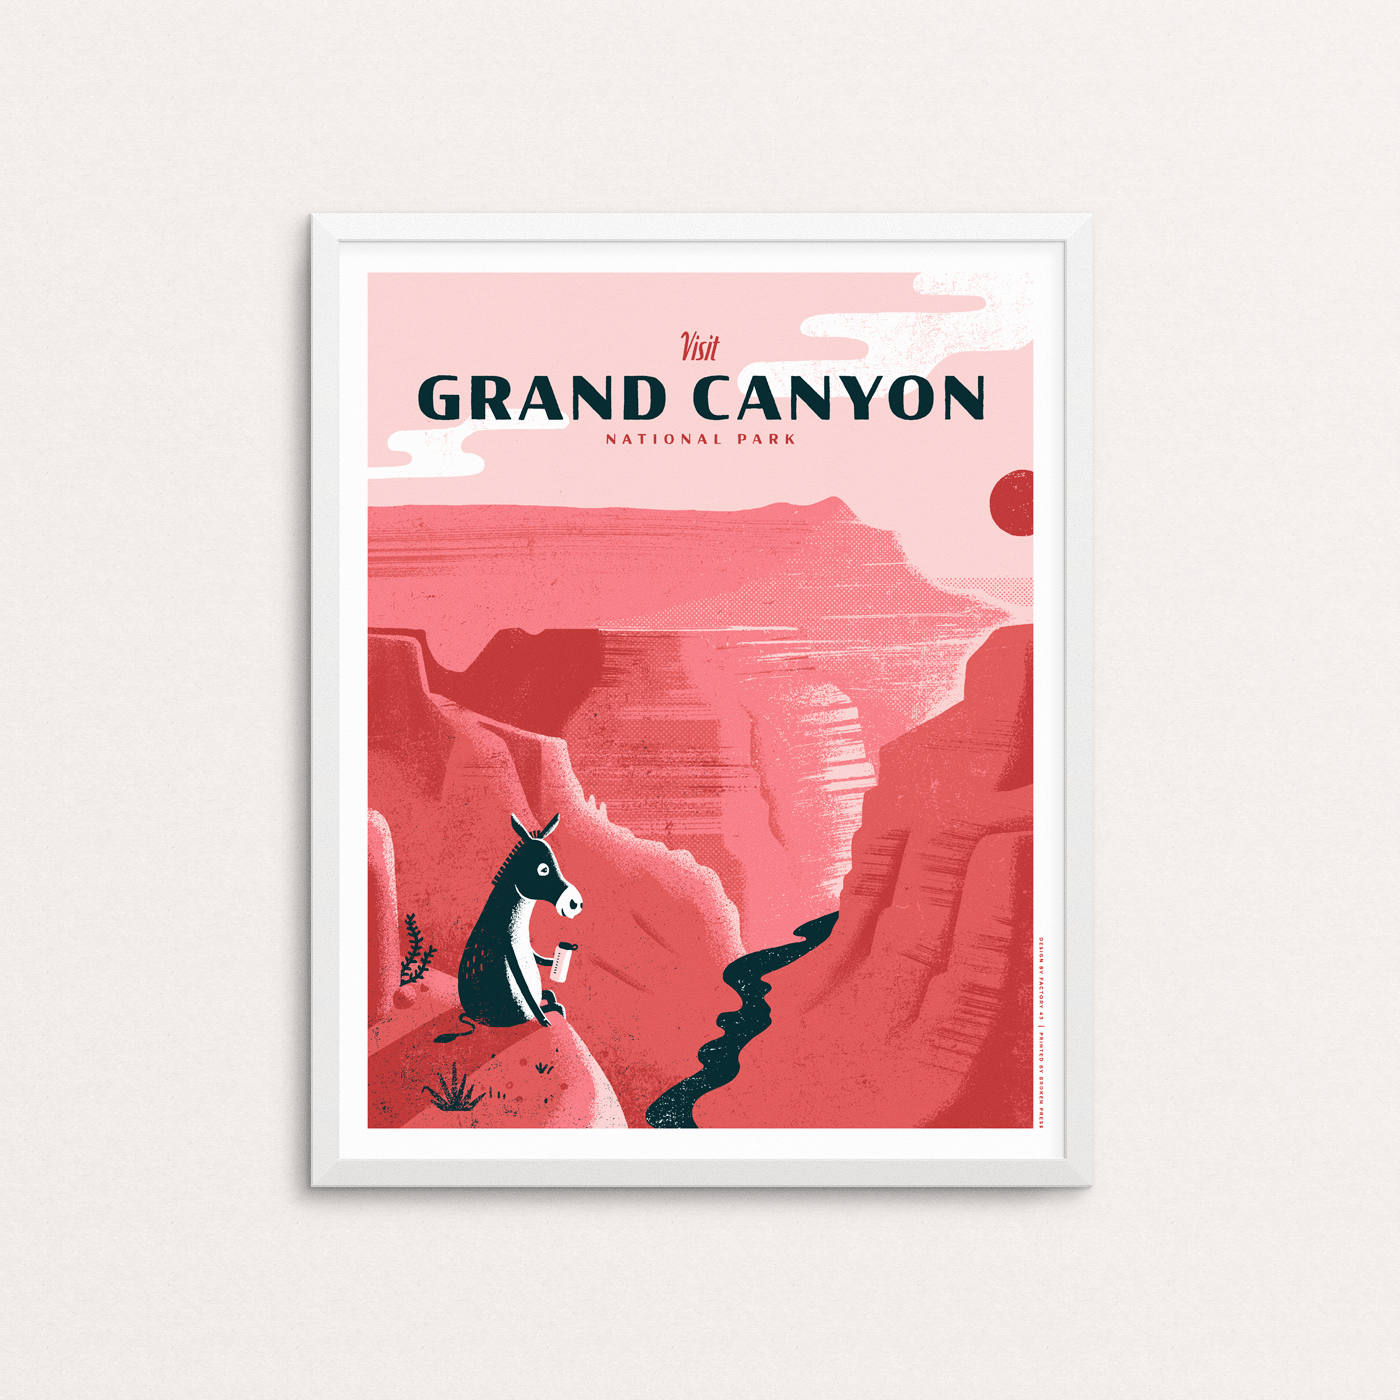 A mule takes a rest to admire the Colorado River snaking its way through Grand Canyon National Park in Arizona. Poster is shown in a white frame.